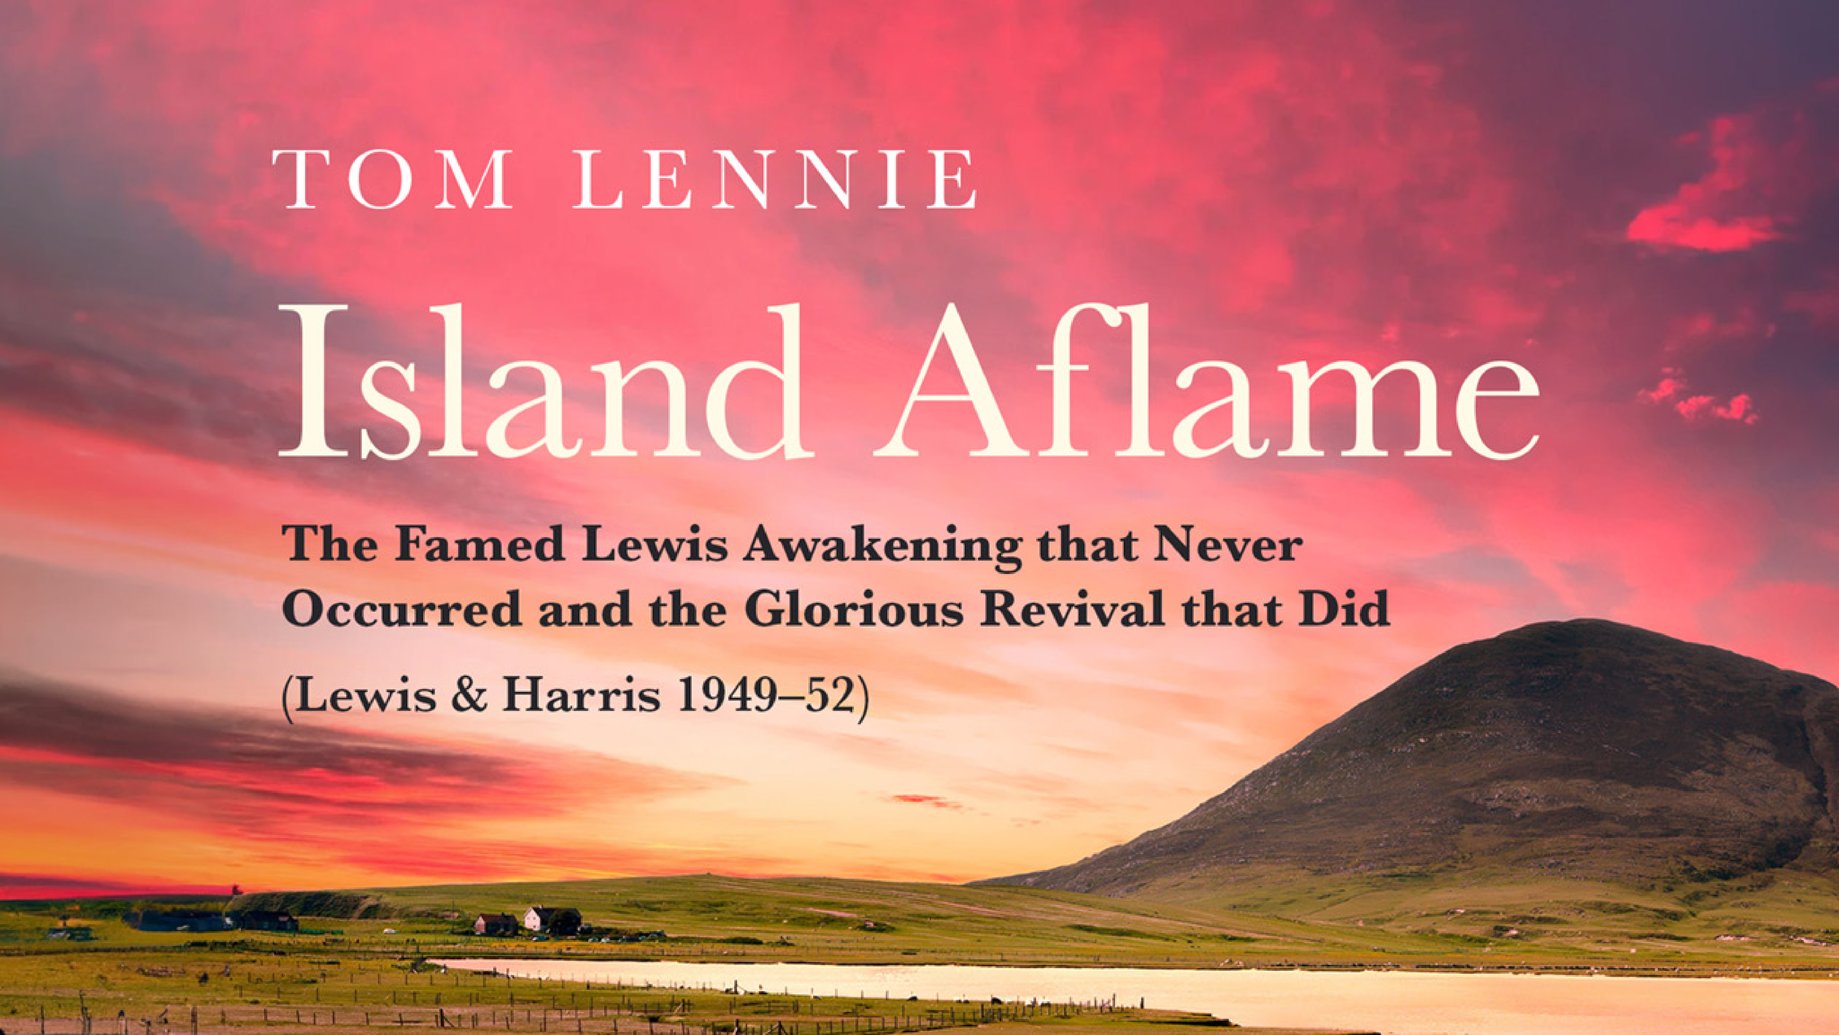 Fresh Perspectives on the ‘Lewis Revival’